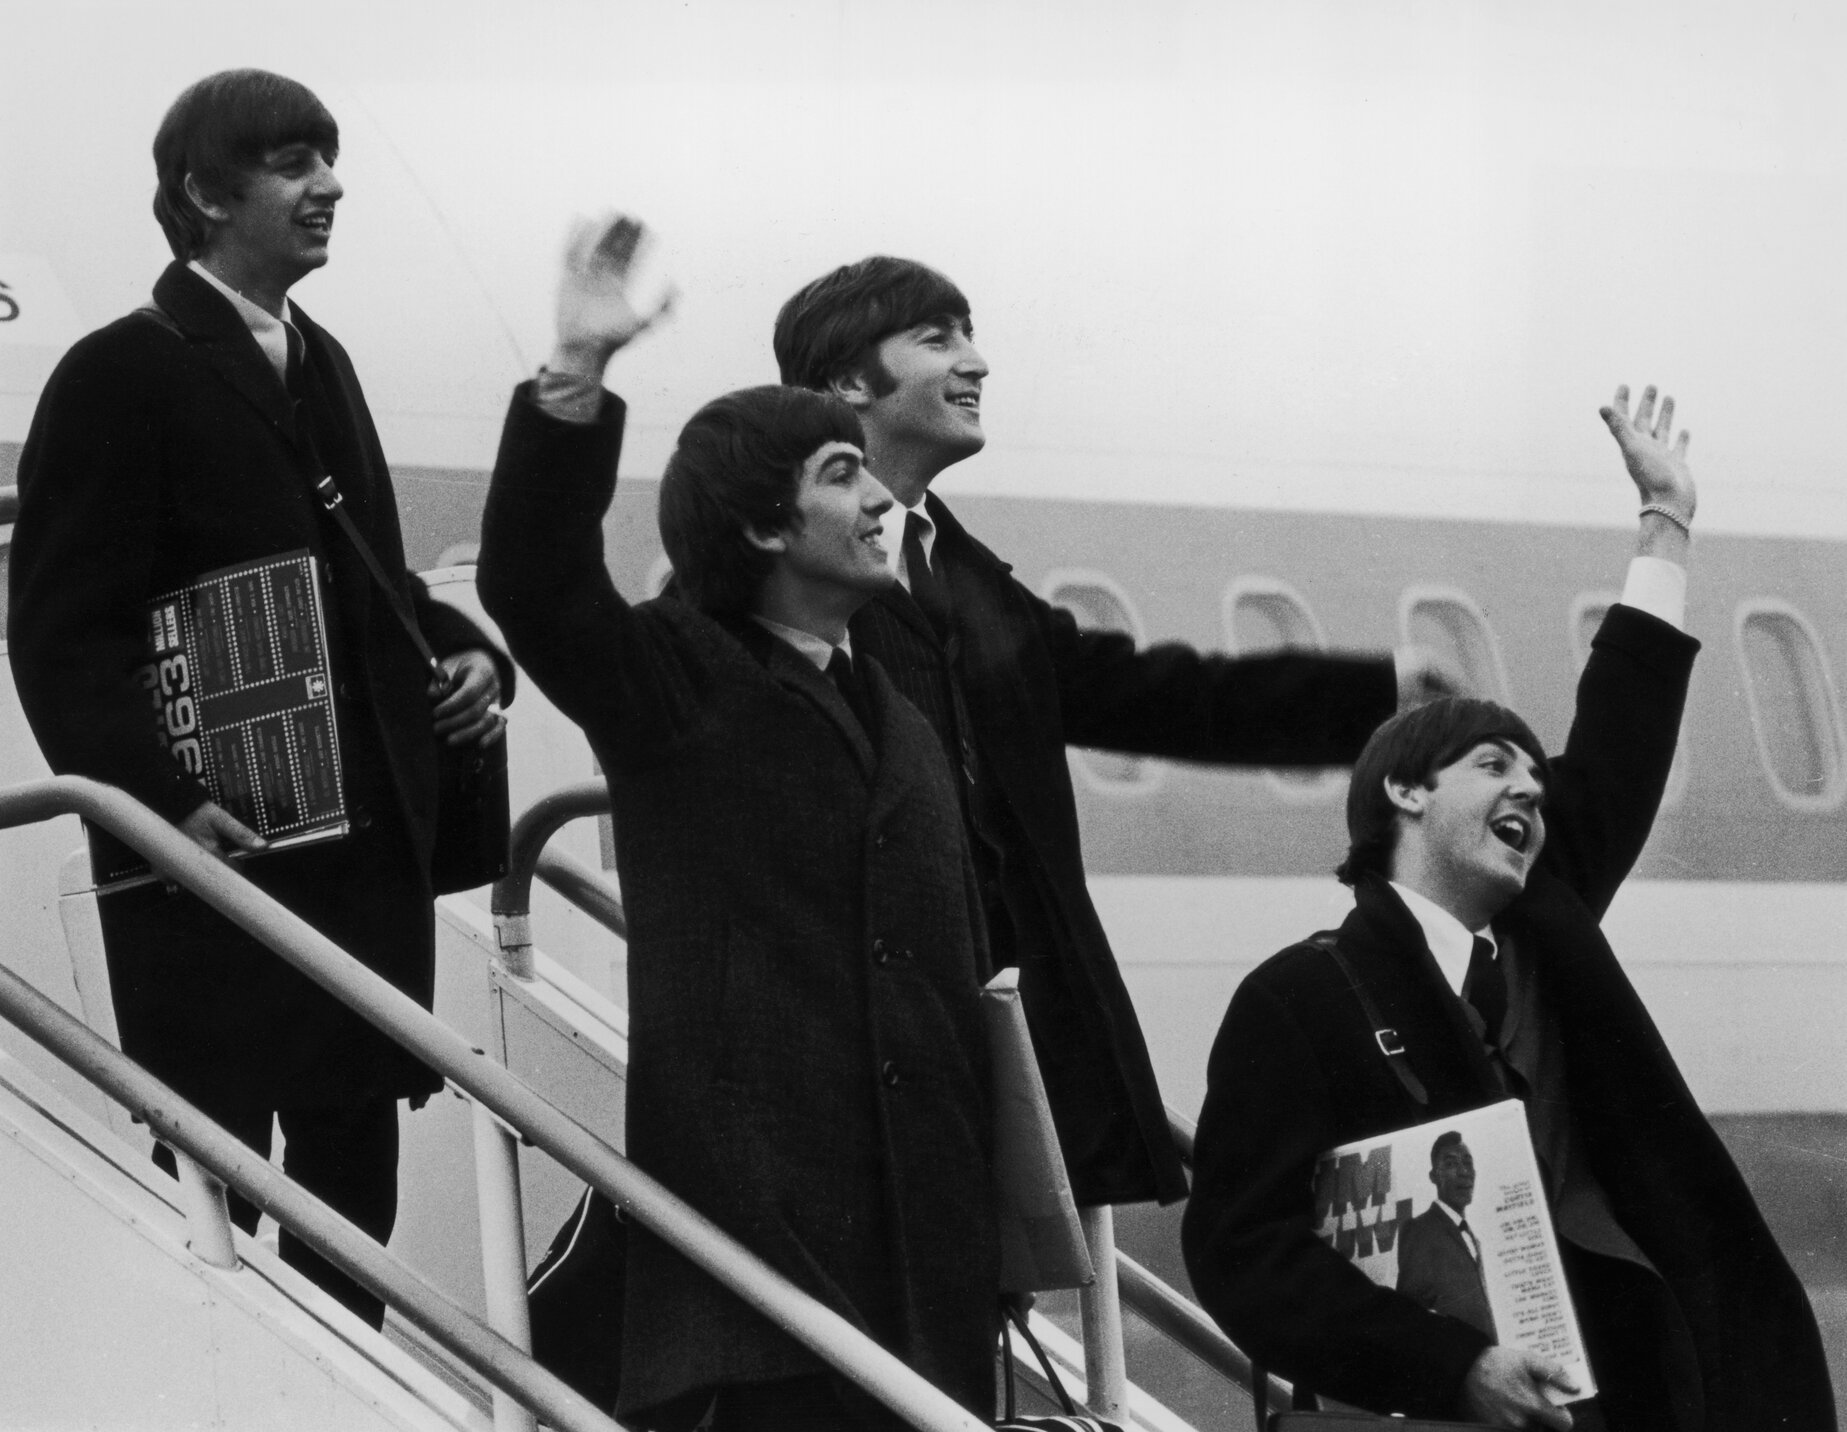 The Beatles (left to right: Ringo Starr, George Harrison, John Lennon, and Paul McCartney) step off the plane which brought them back from their tour of the United States.